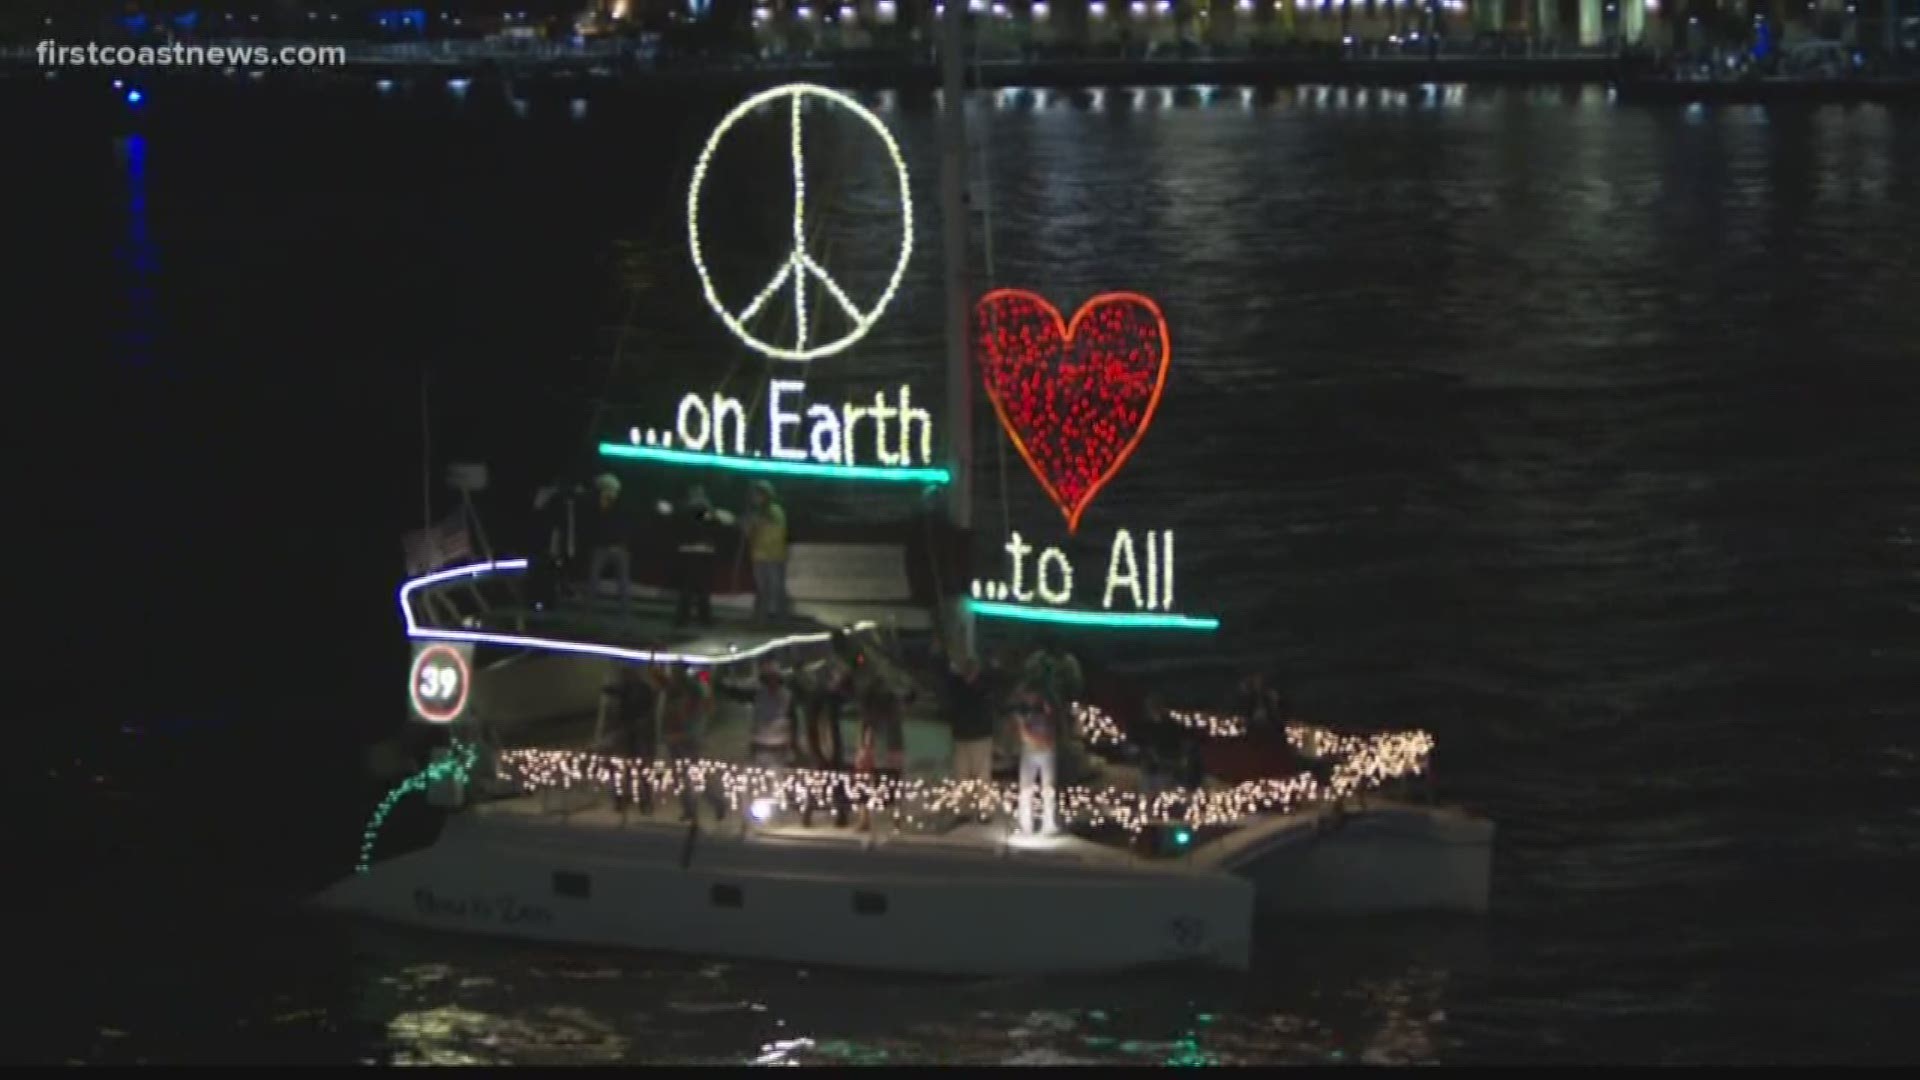 The annual Jacksonville Light and Boat Parade will take place on Saturday, Nov. 30 at 6:30 p.m.